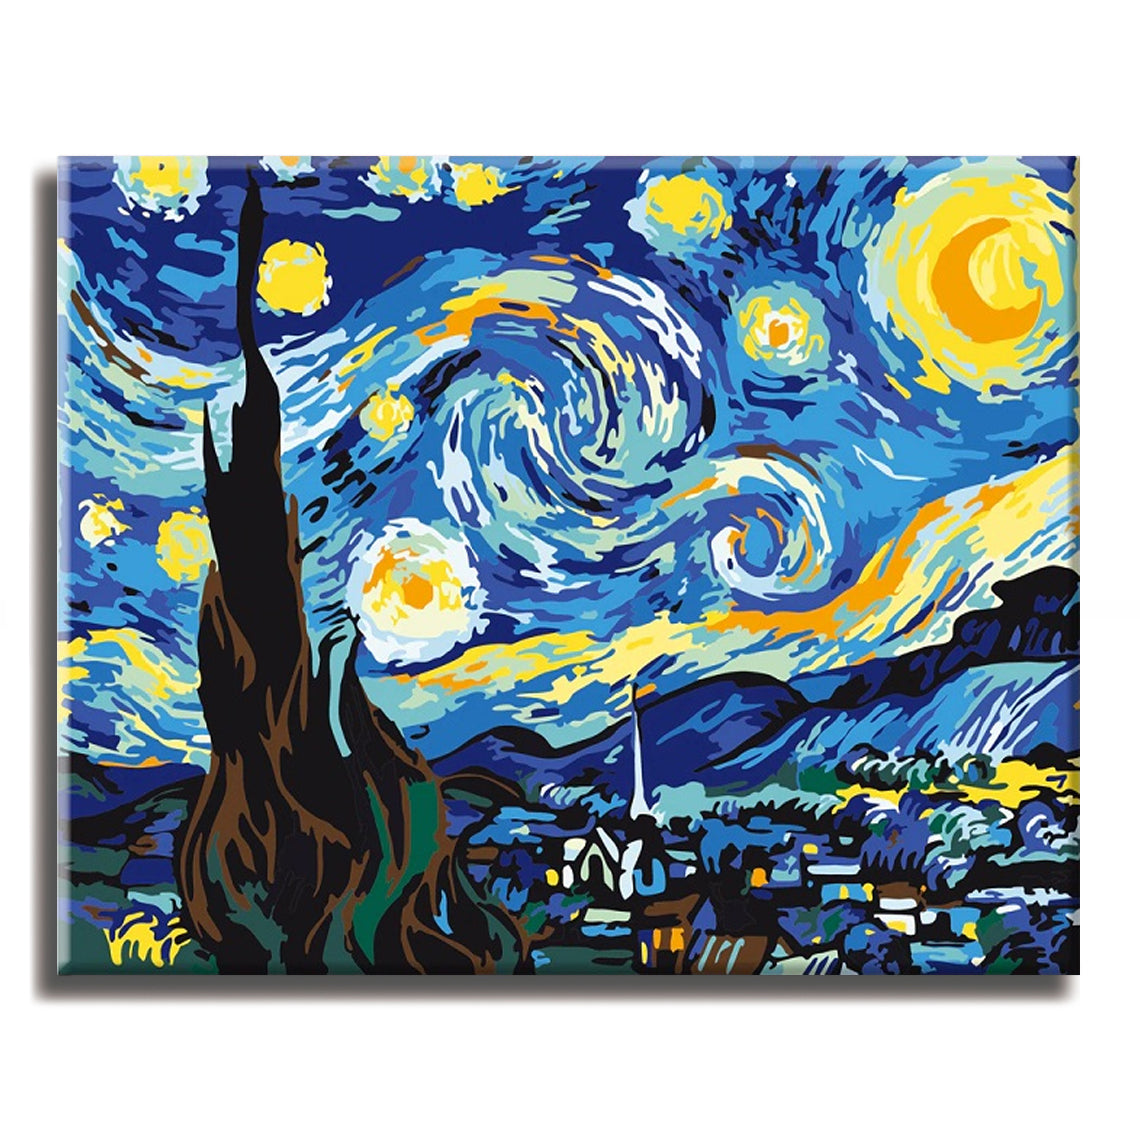 Masterpiece By Numbers - Paint By Numbers Kits For Adults